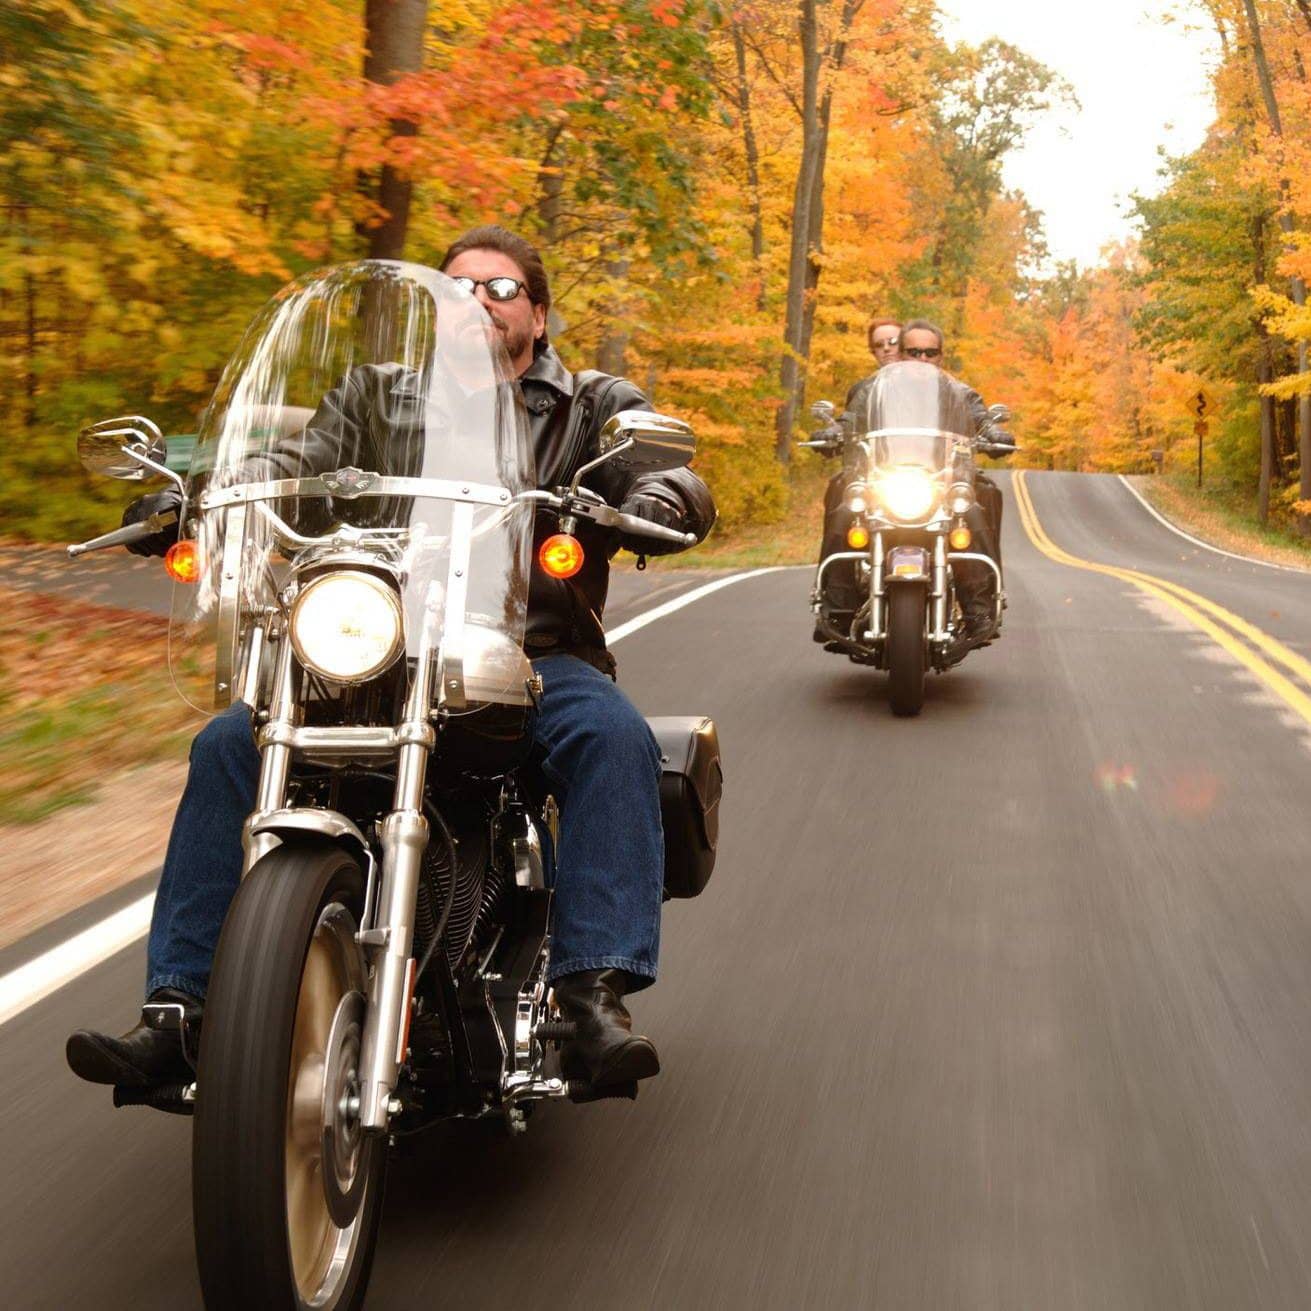 Motorcycle Riding Associations Offer Benefits, Education — and Friendship